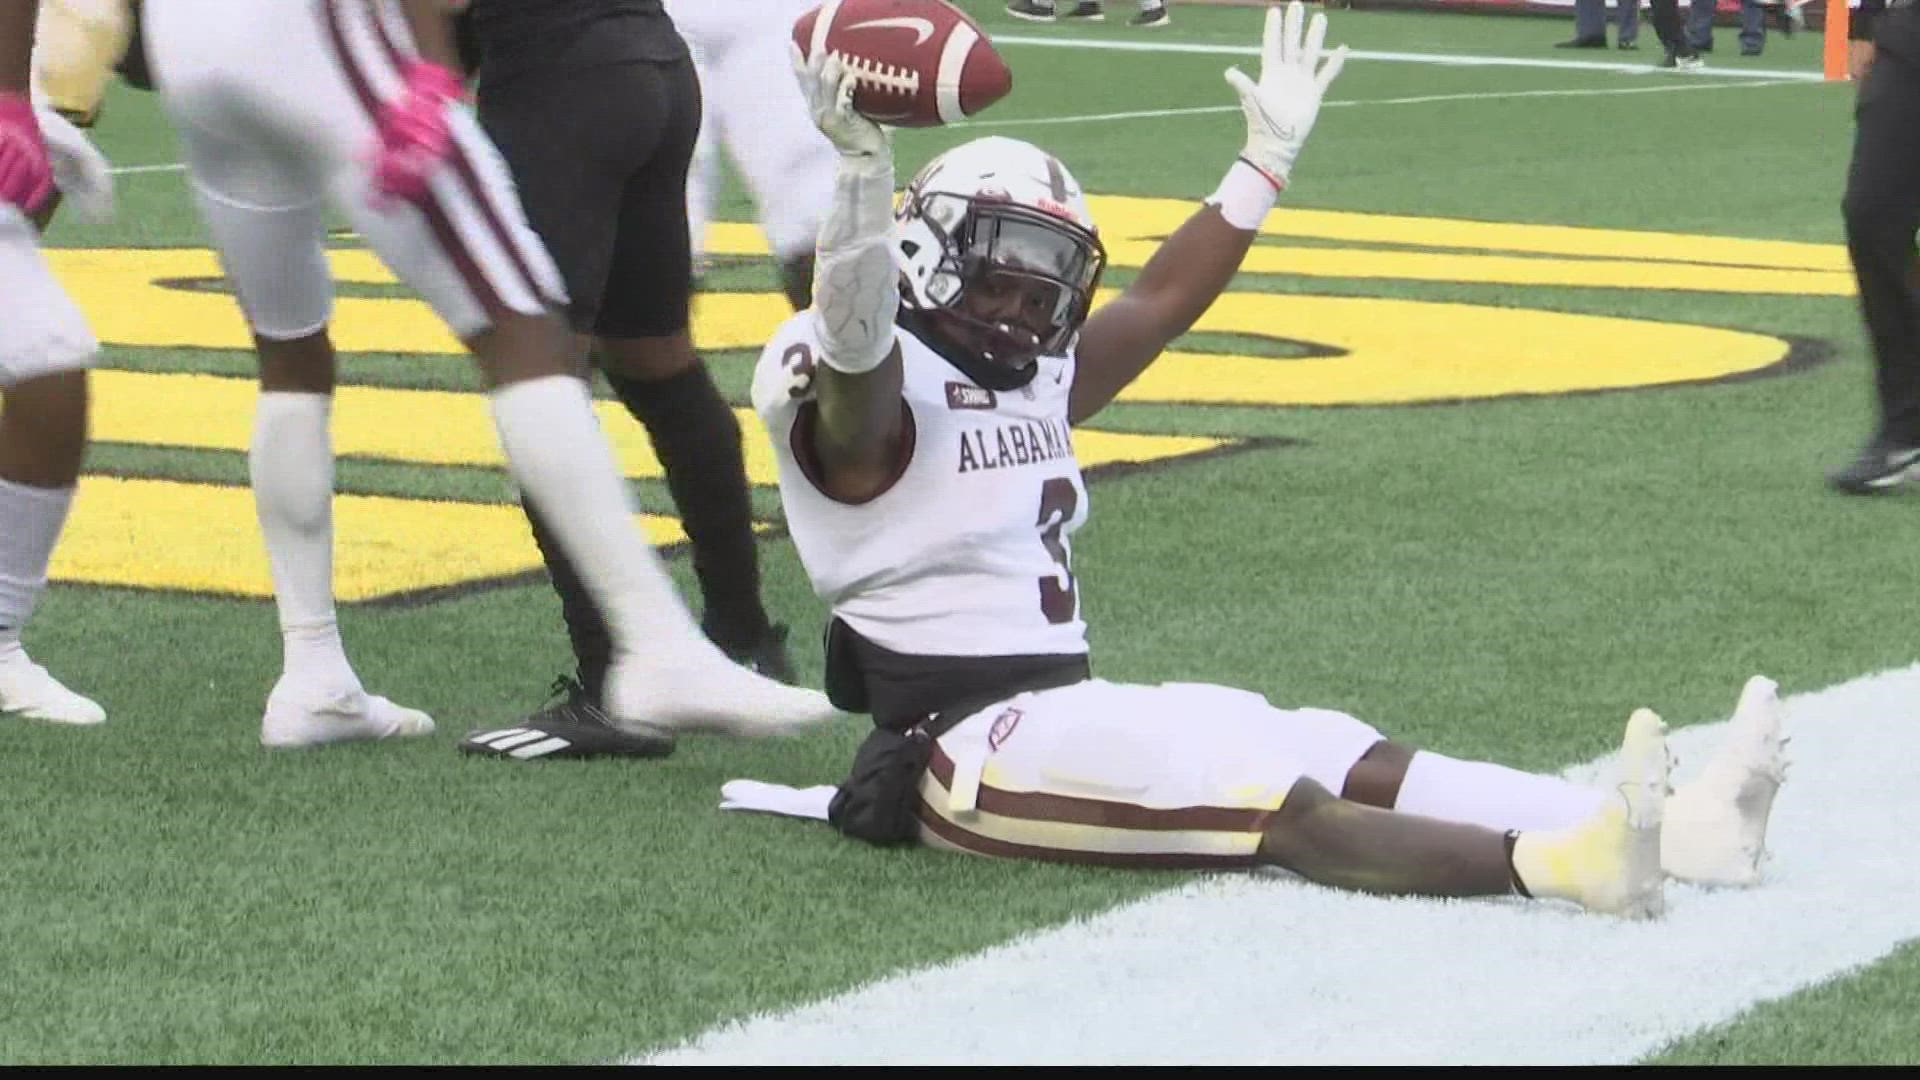 Alabama A&M notched its 4th straight victory over Alabama State. ***Highlight correction: Alabama State Quarterback is Ryan Nettles.***